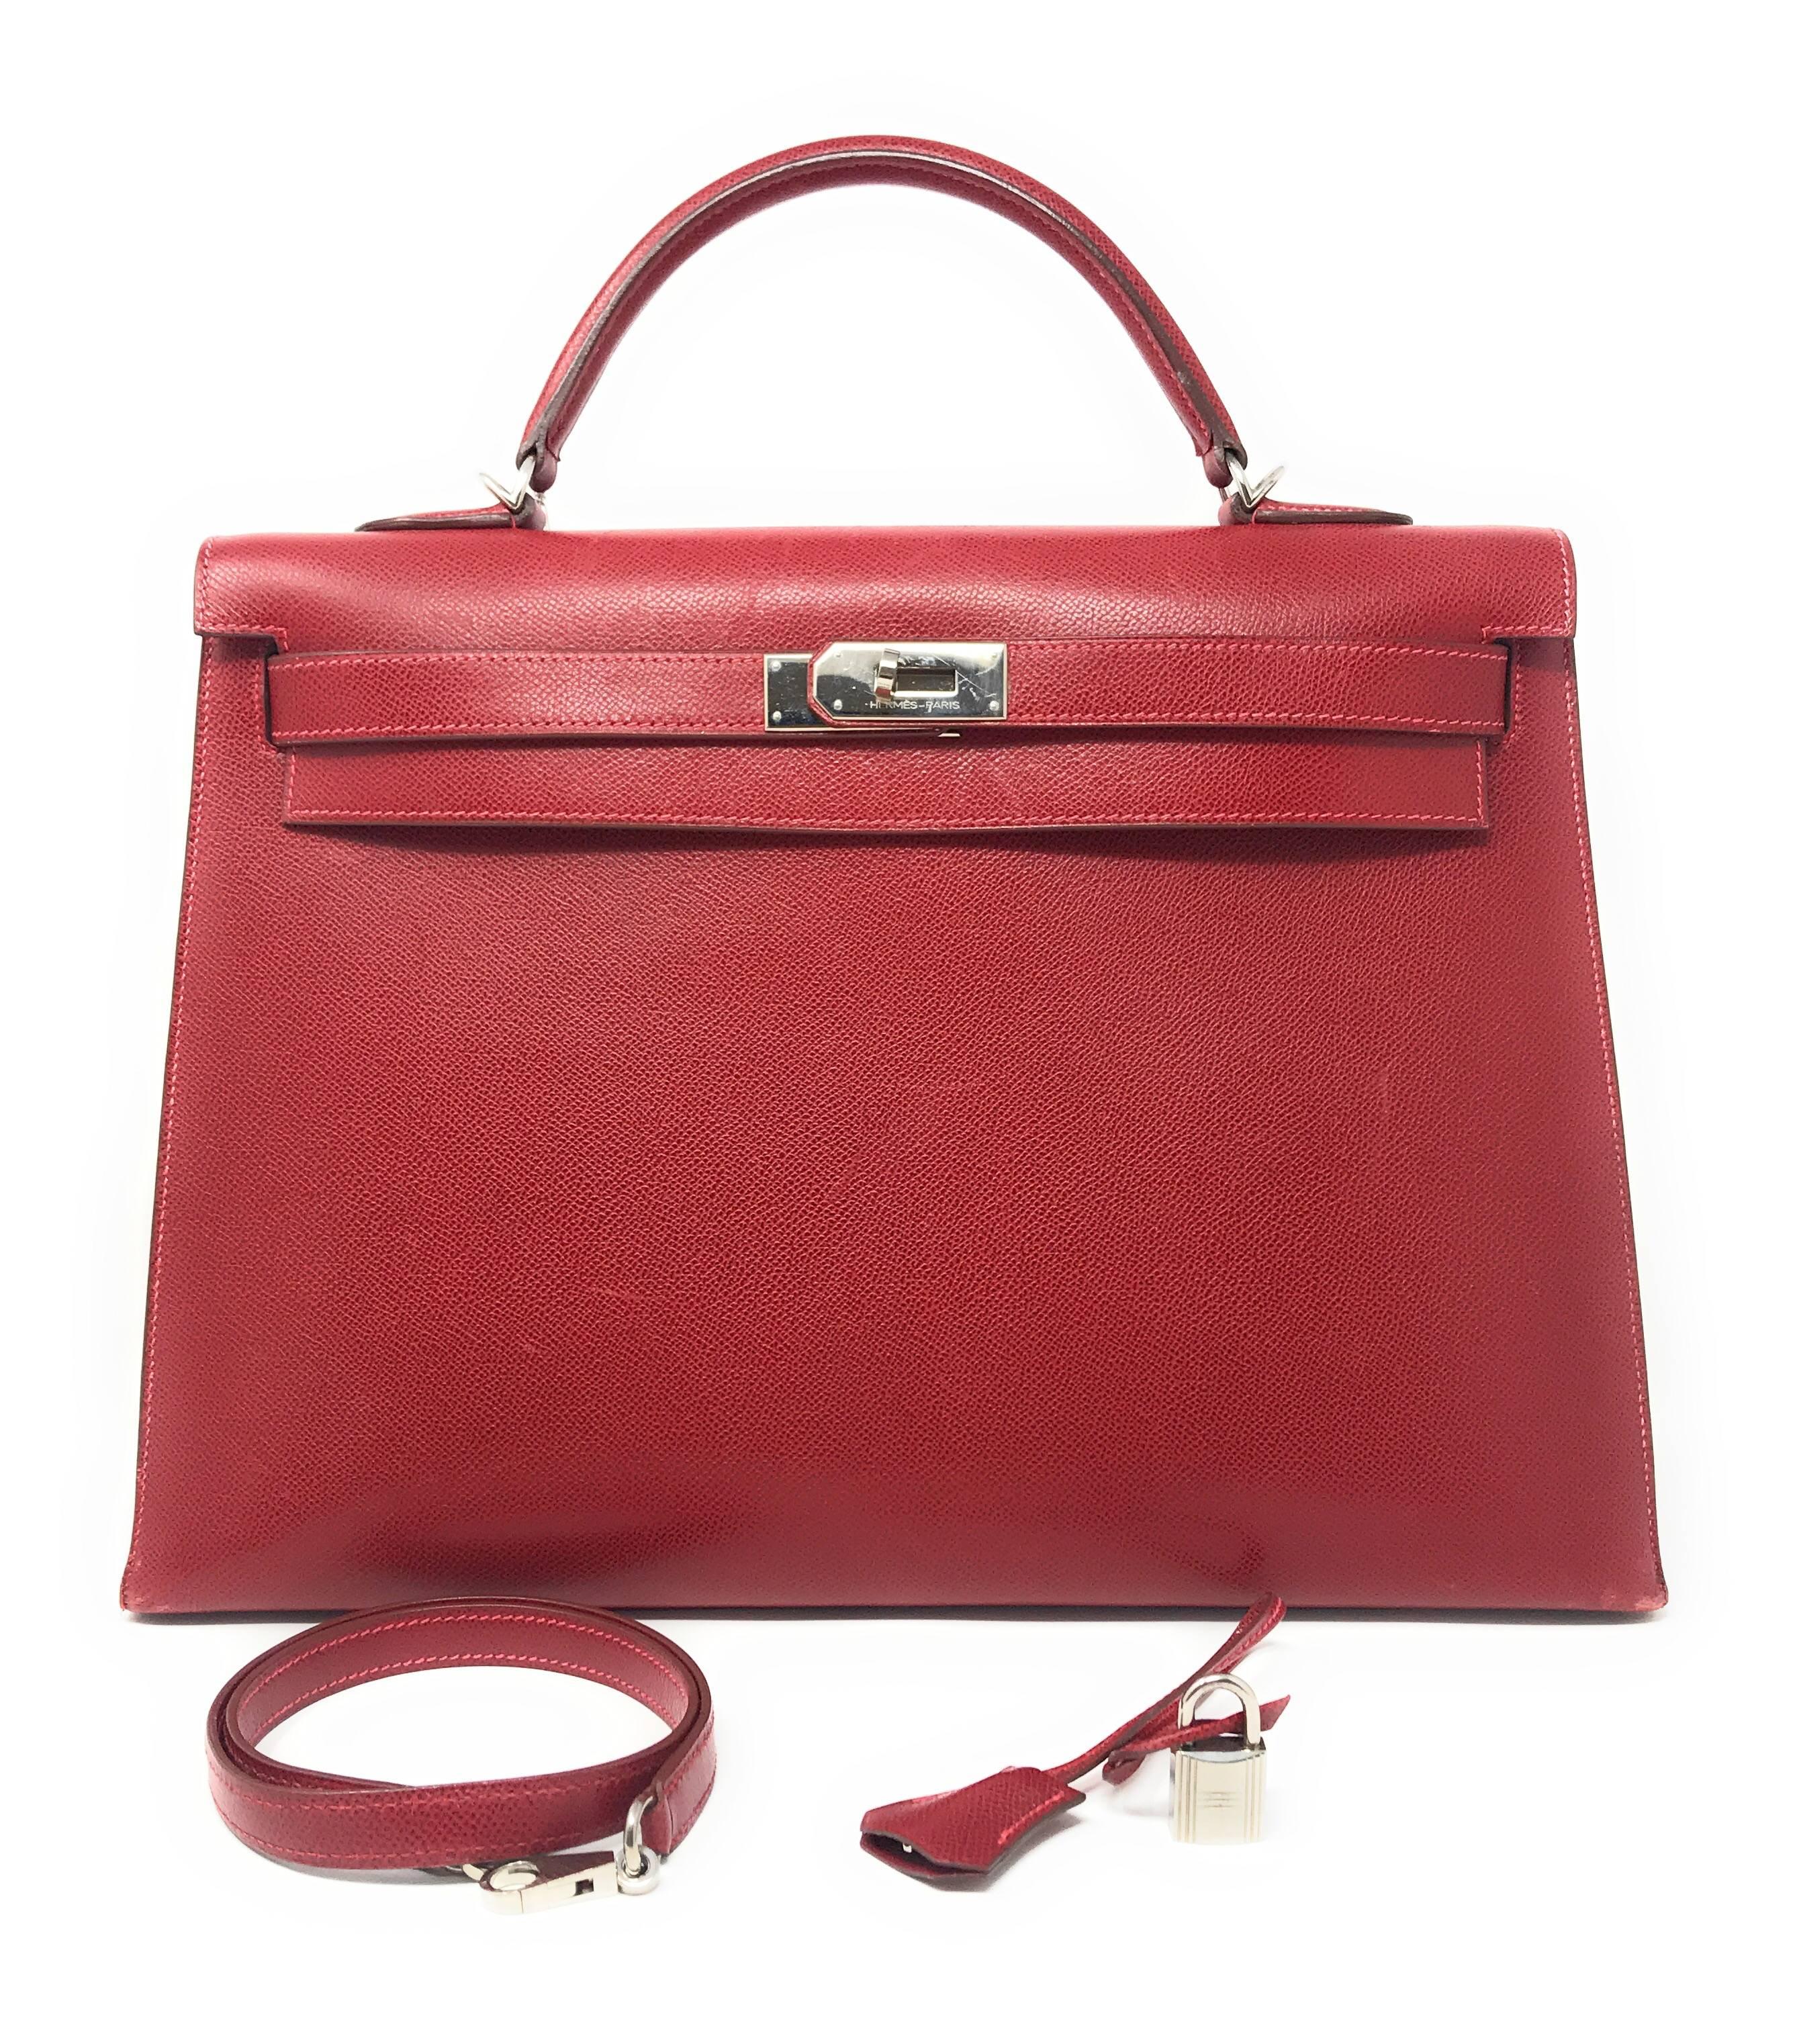 This Hermes Kelly bag is crafted in red Buffalo leather which is relatively water resistant. 
It is the structured Sellier style accented with Palladium hardware. This bag has the versatility of being worn as a shoulder bag since it has a detachable